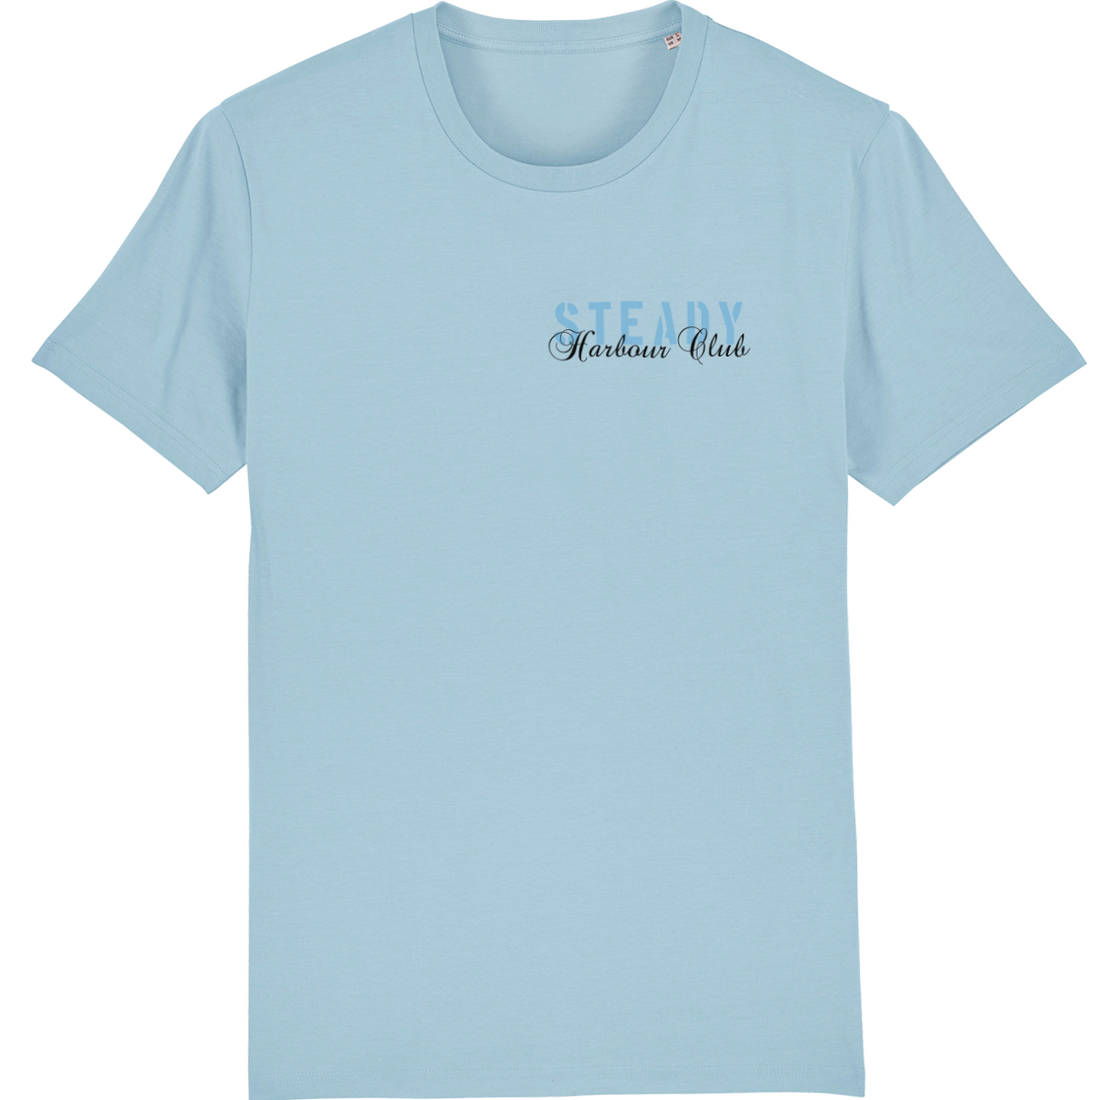 The Harbour Club - T-Shirt